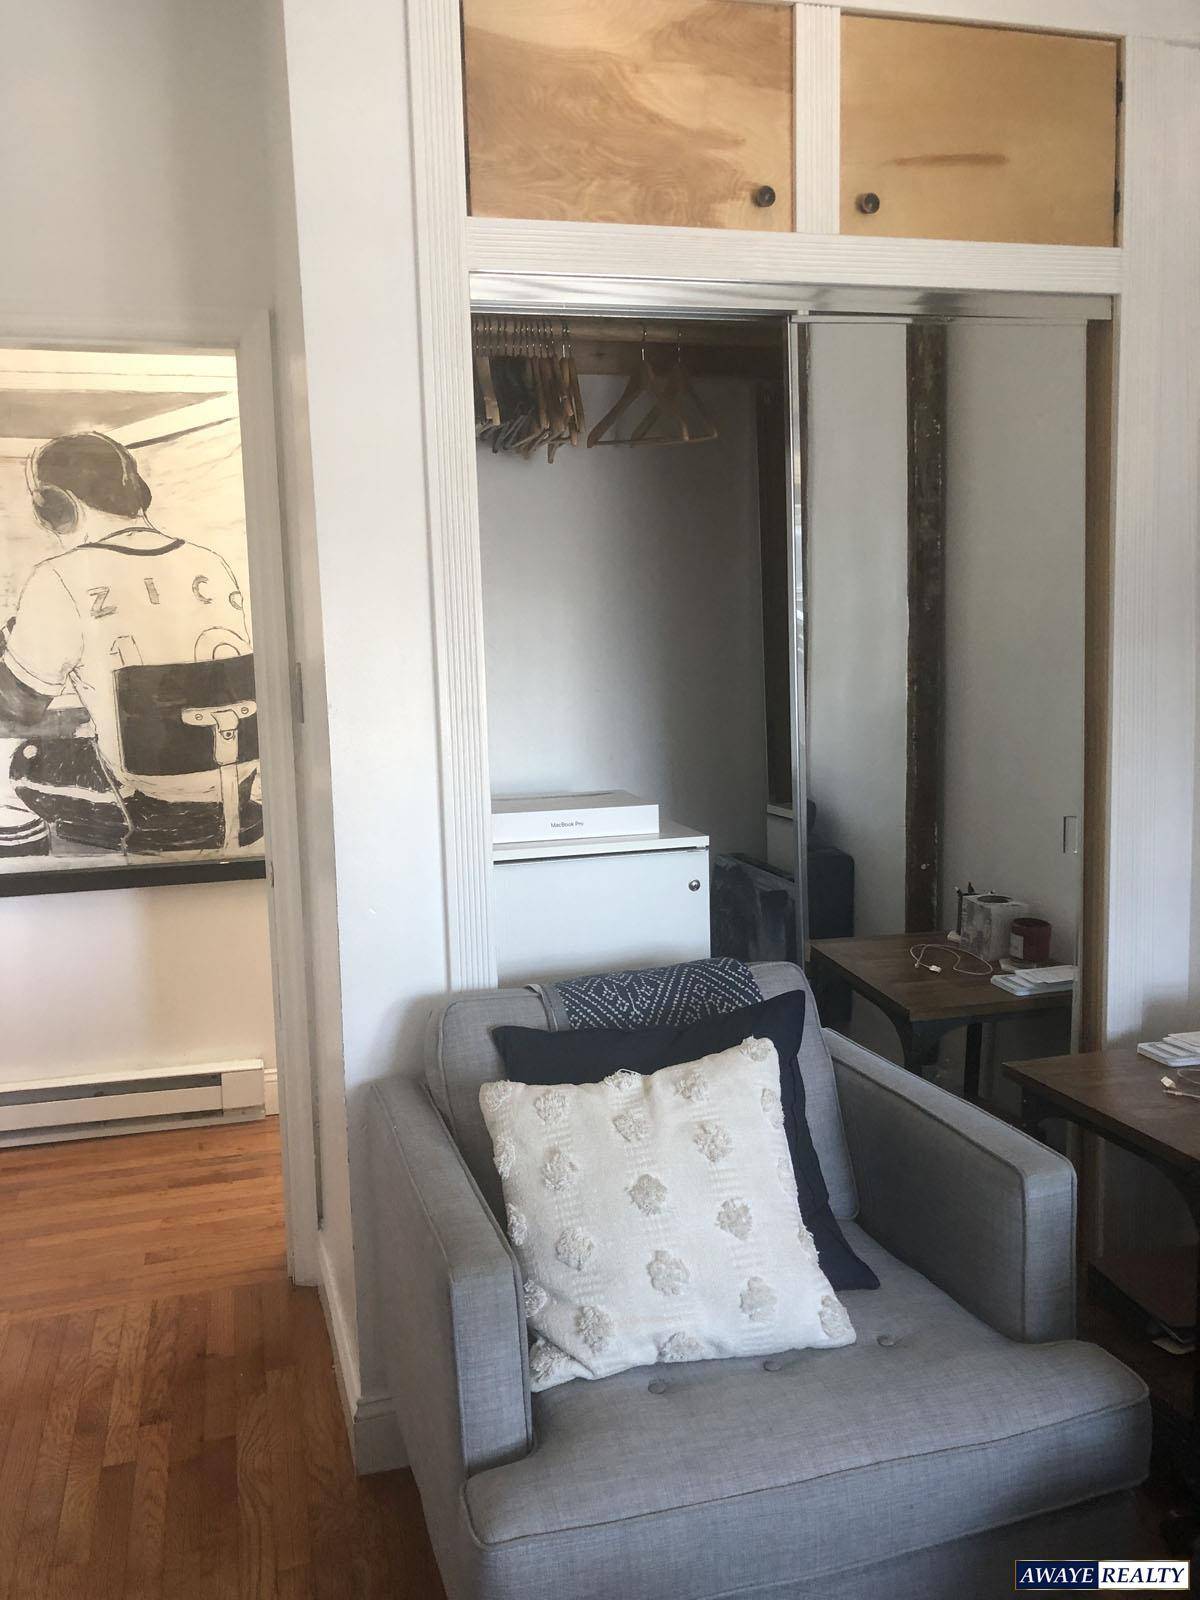 Incredible sunny TWO bedroom, TWO bathroom apartment with private outdoor space in sought after Carroll Gardens location !